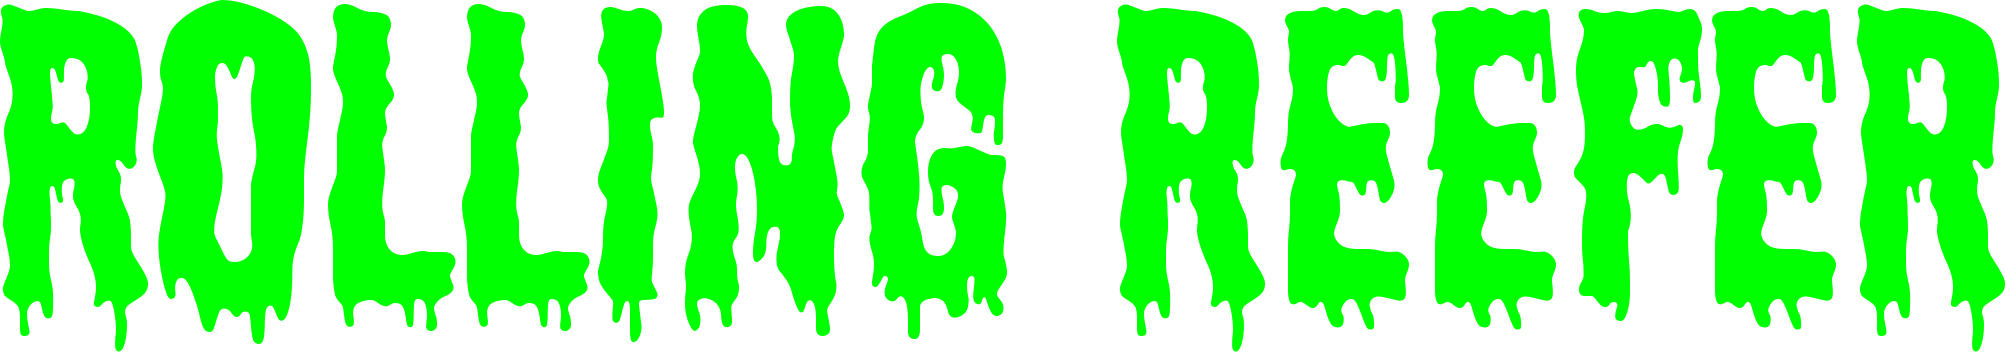 Rolling Reefer Logo In Large, Bright Green, Melting - Rolling Reefer Logo In Large, Bright Green, Melting (2005x352)